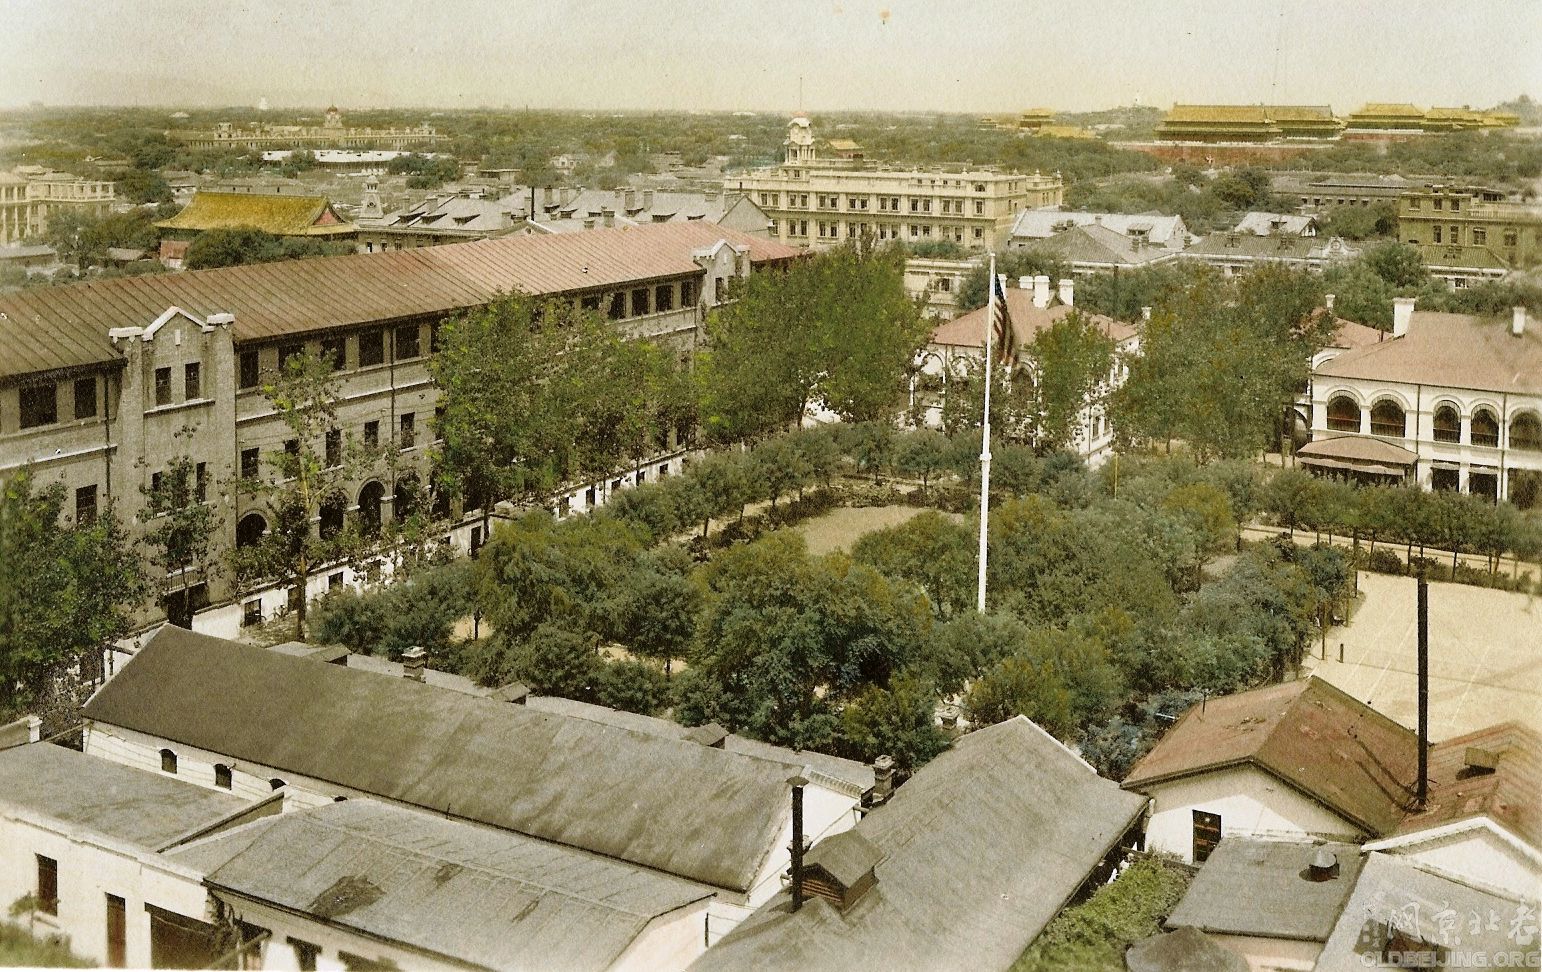 American Legation compound in Peking mפʹ